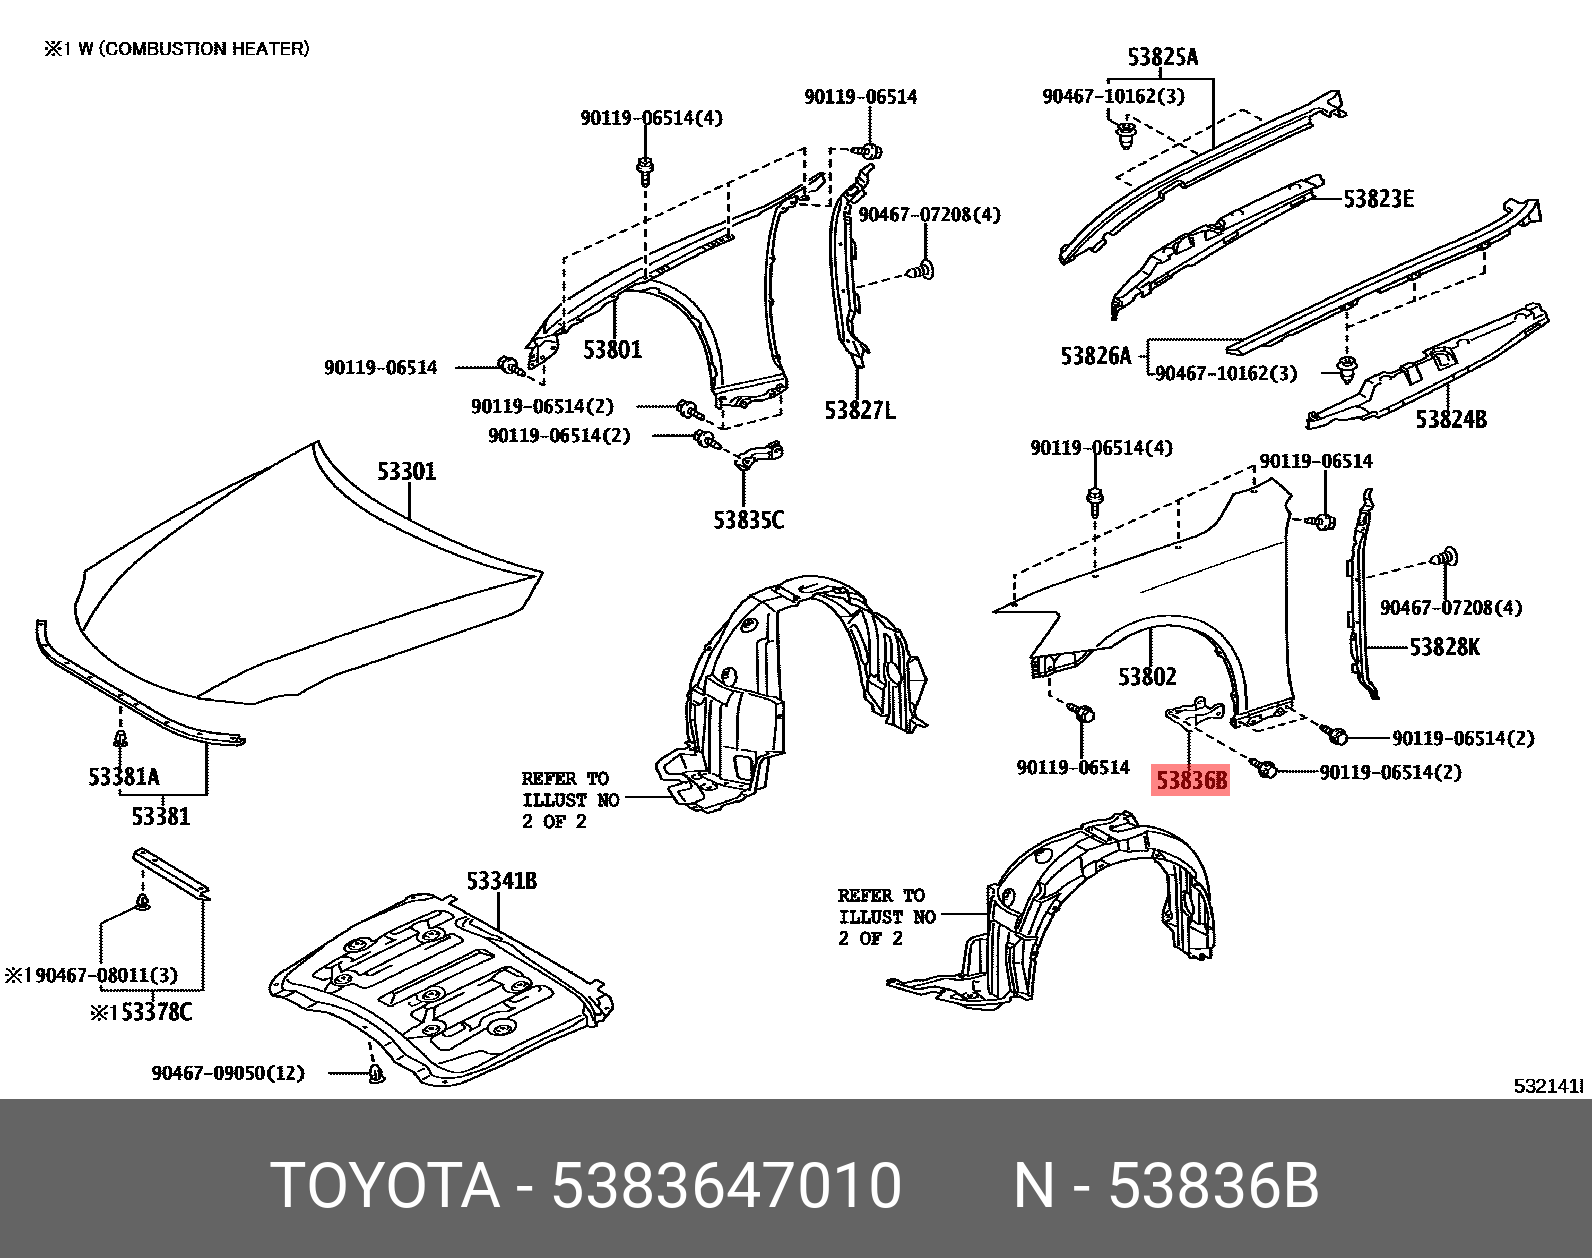 PRIUS (PLUG-IN) LEASE 200912 - 201010, BRACKET, FRONT SIDE PANEL, LH